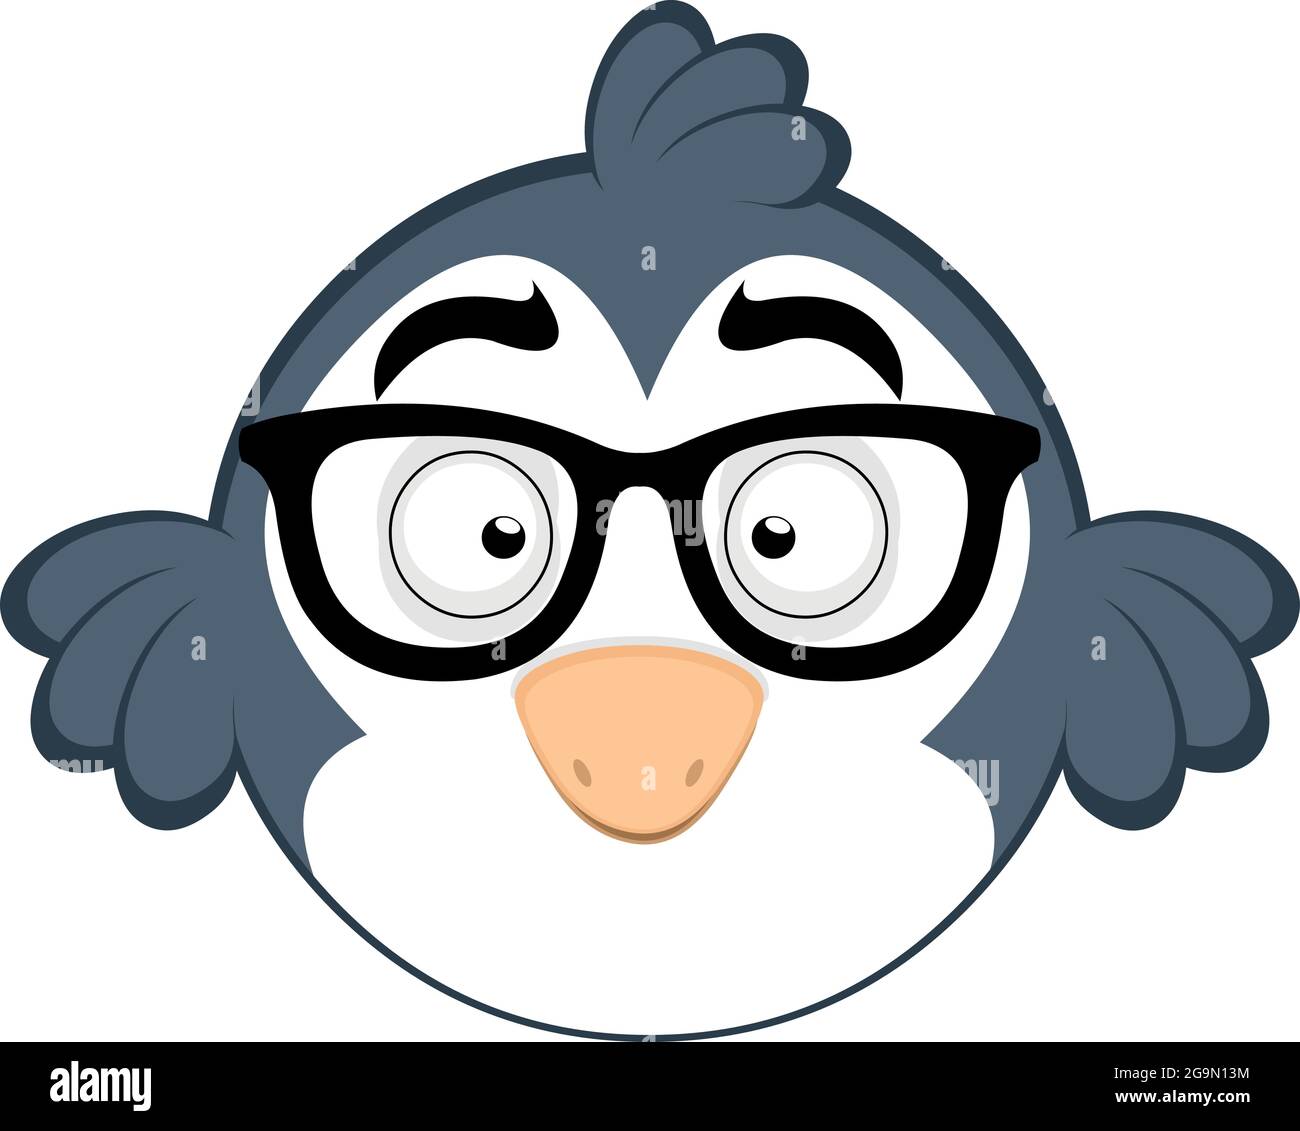 Vector emoticon illustration of a cartoon bird with spectacles Stock Vector